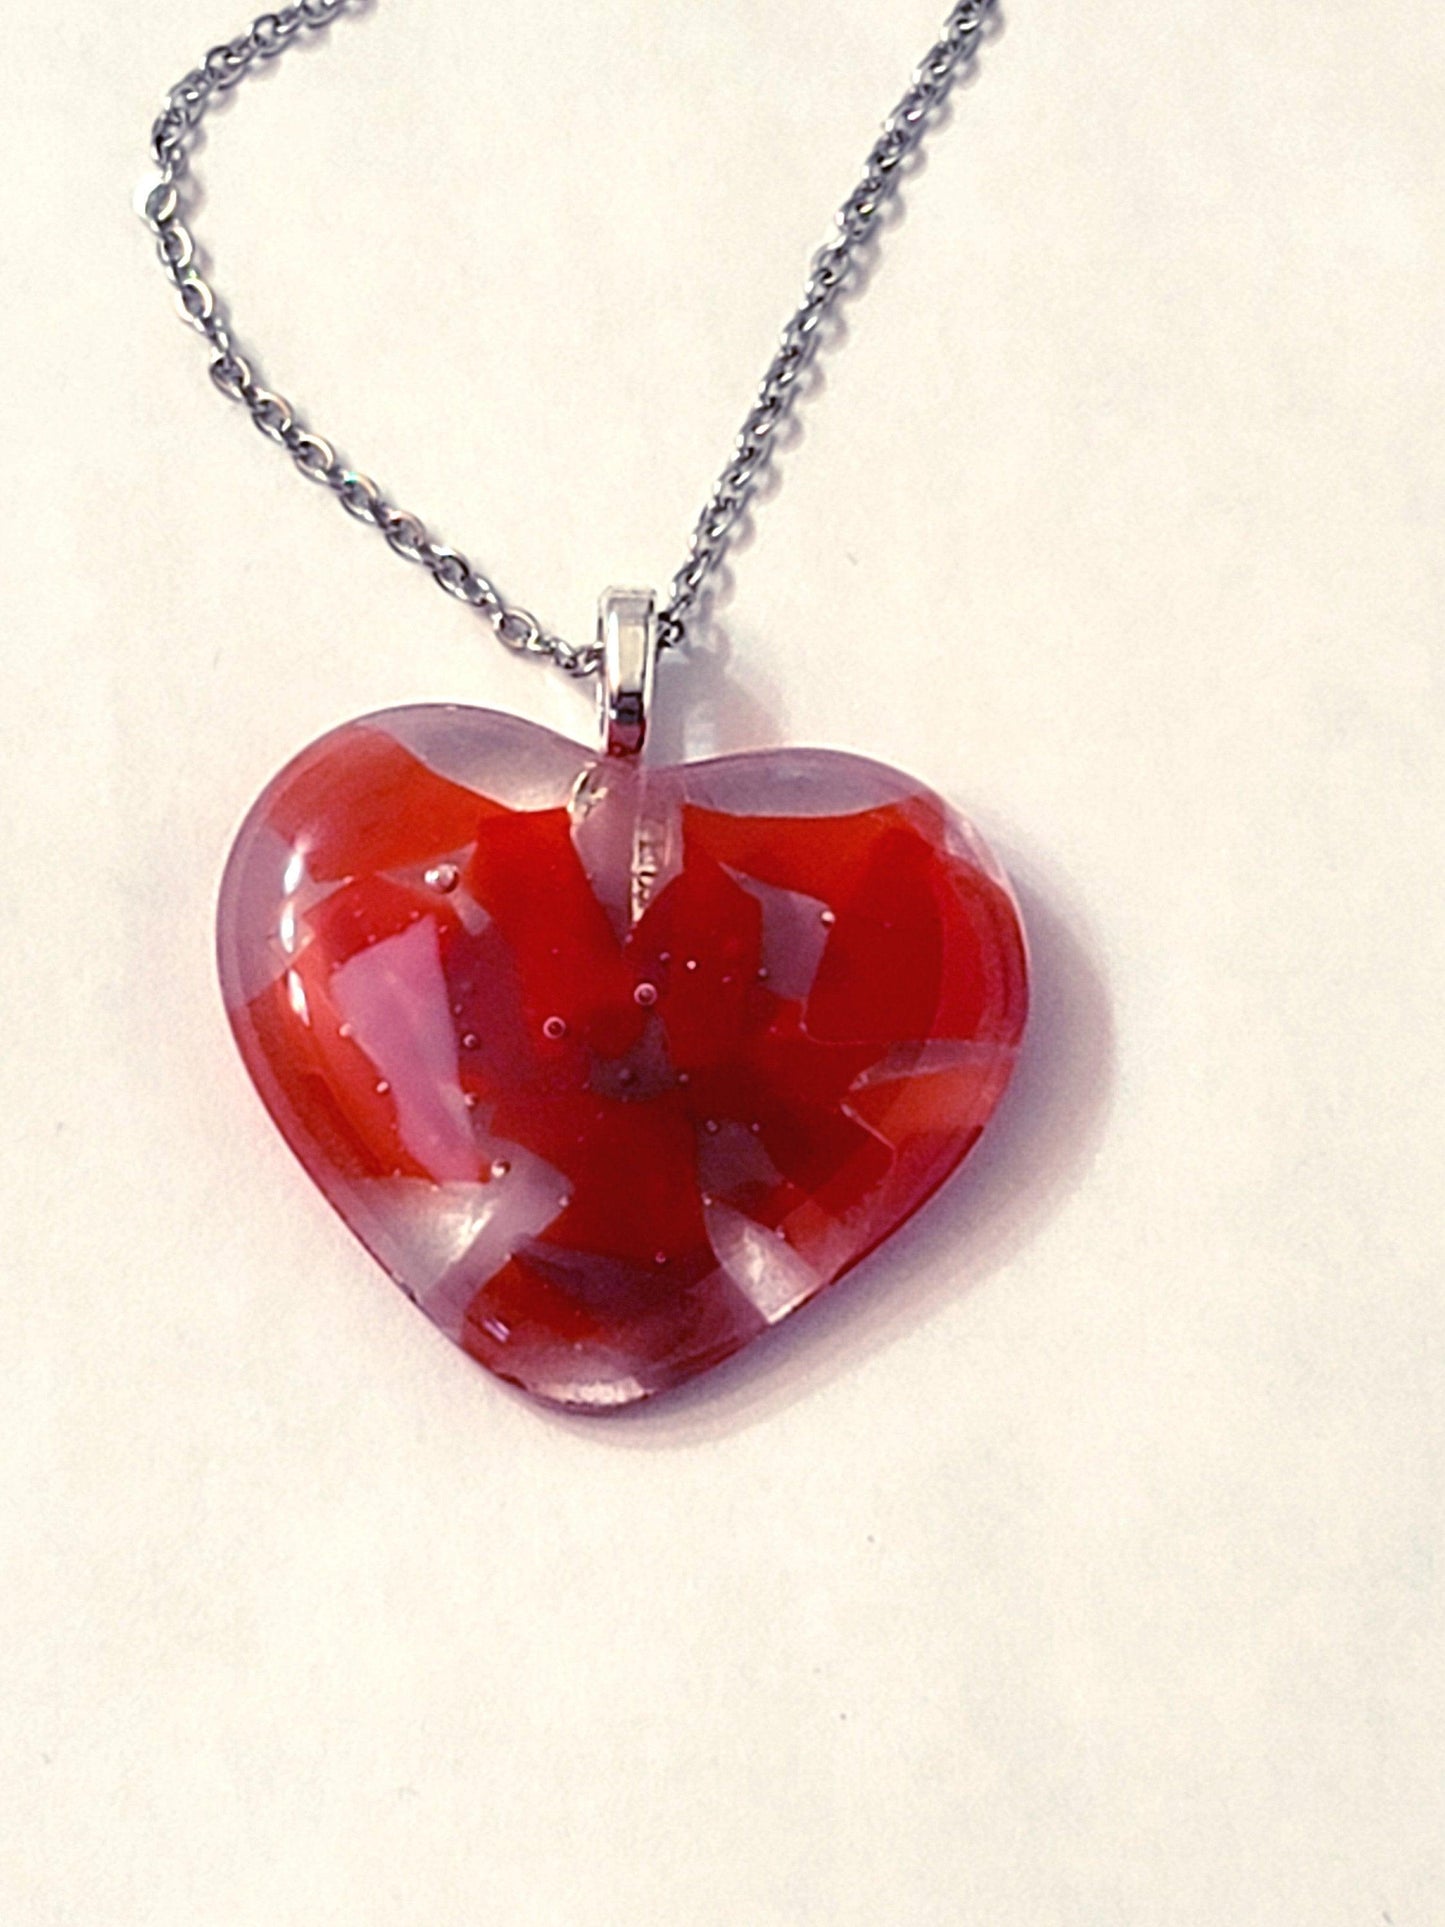 Shades of red fused Glass Heart Pendant necklace on 18 inch stainless steel chain